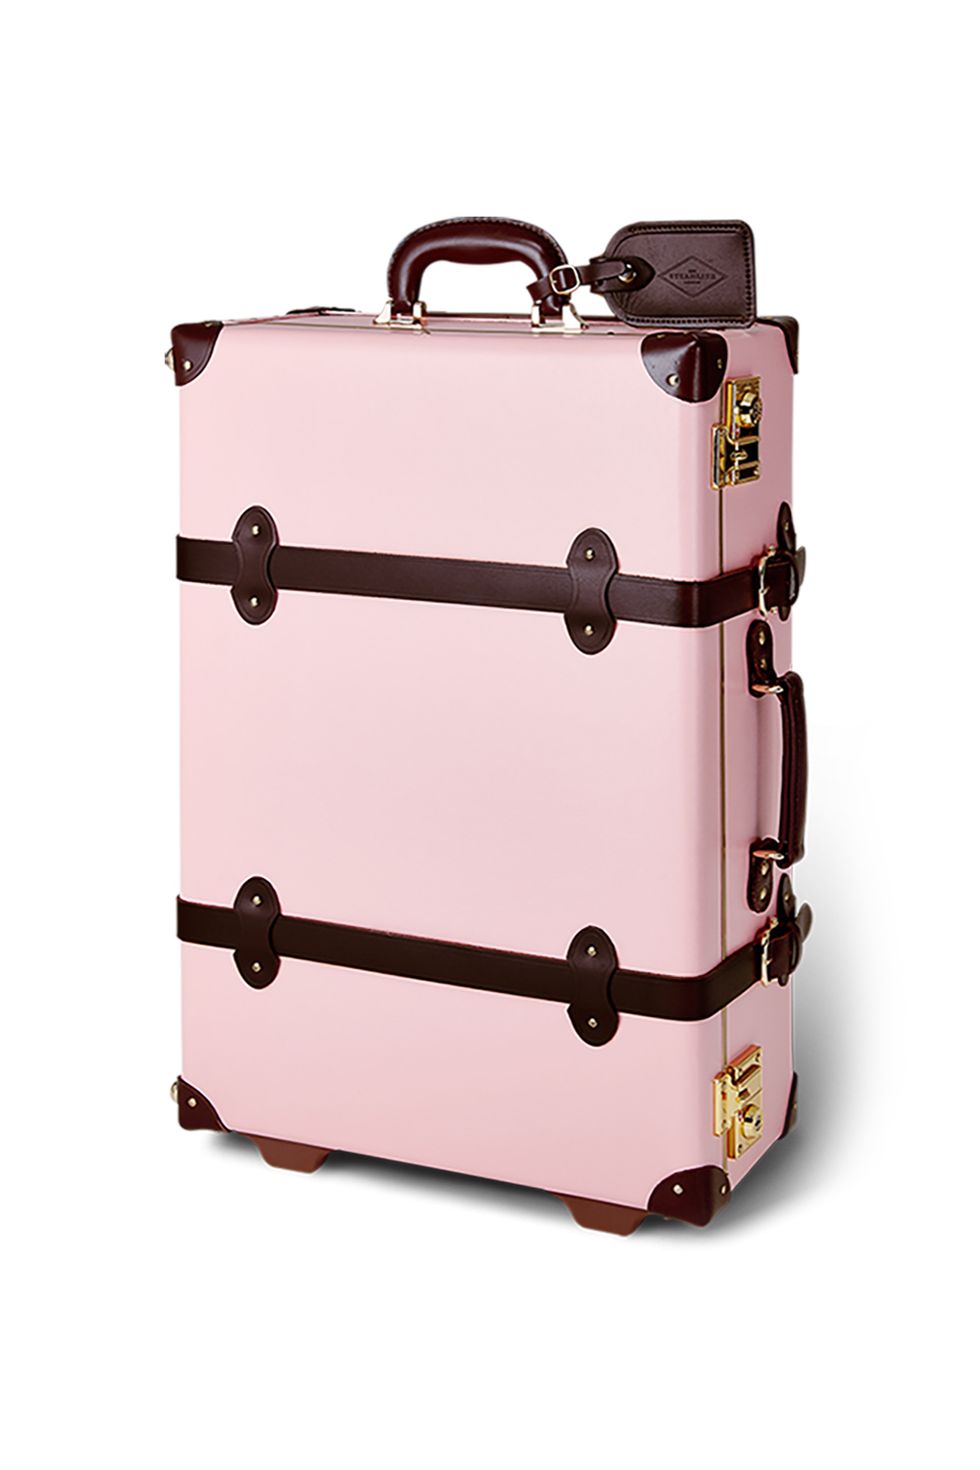 <p>She's a beaut, ain't she? But make sure to lock her up tight, lest she disappear into the that great warehouse in the sky forever.&nbsp;</p><p>$789, <a href="https://www.steamlineluggage.com/artiste-pink-carryon.html" target="_blank" data-tracking-id="recirc-text-link">steamlineluggage.com</a>.</p>